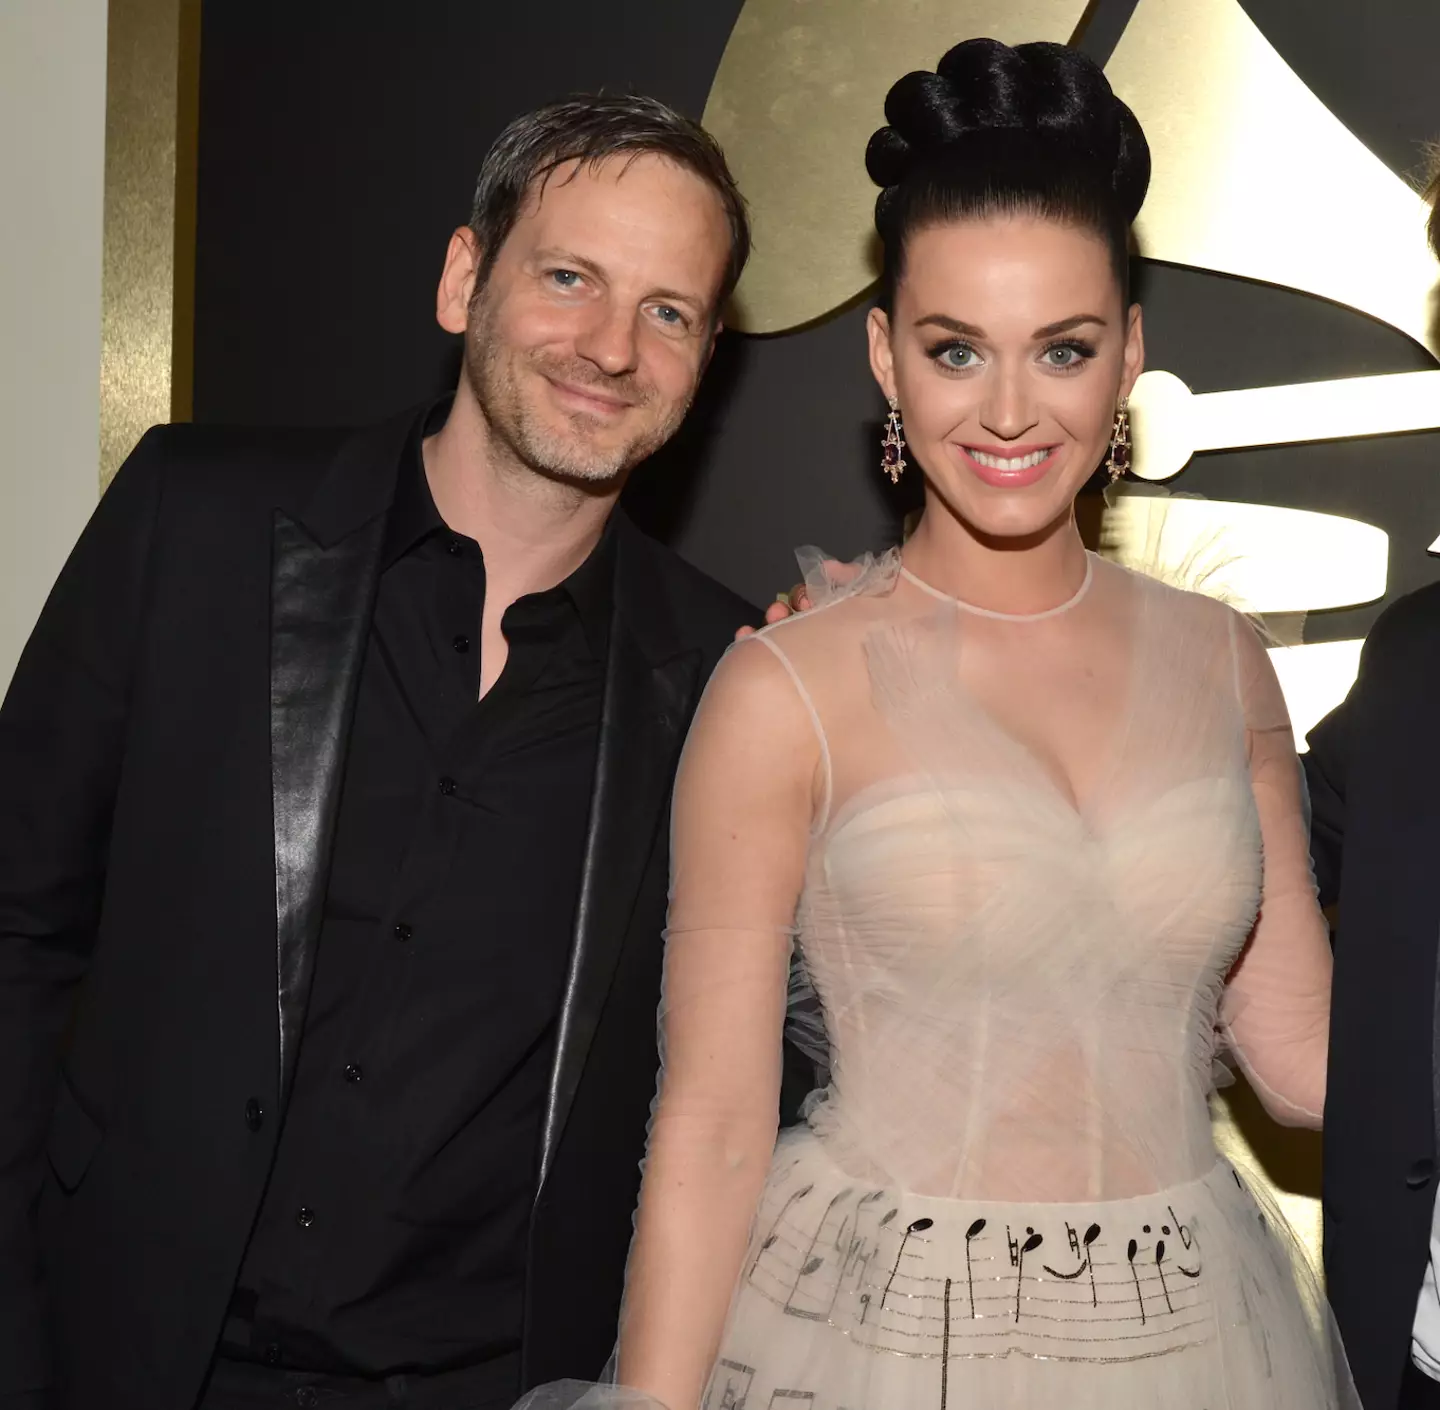 Katy Perry and Dr Luke are rumored to be working together again. (Lester Cohen/WireImage)